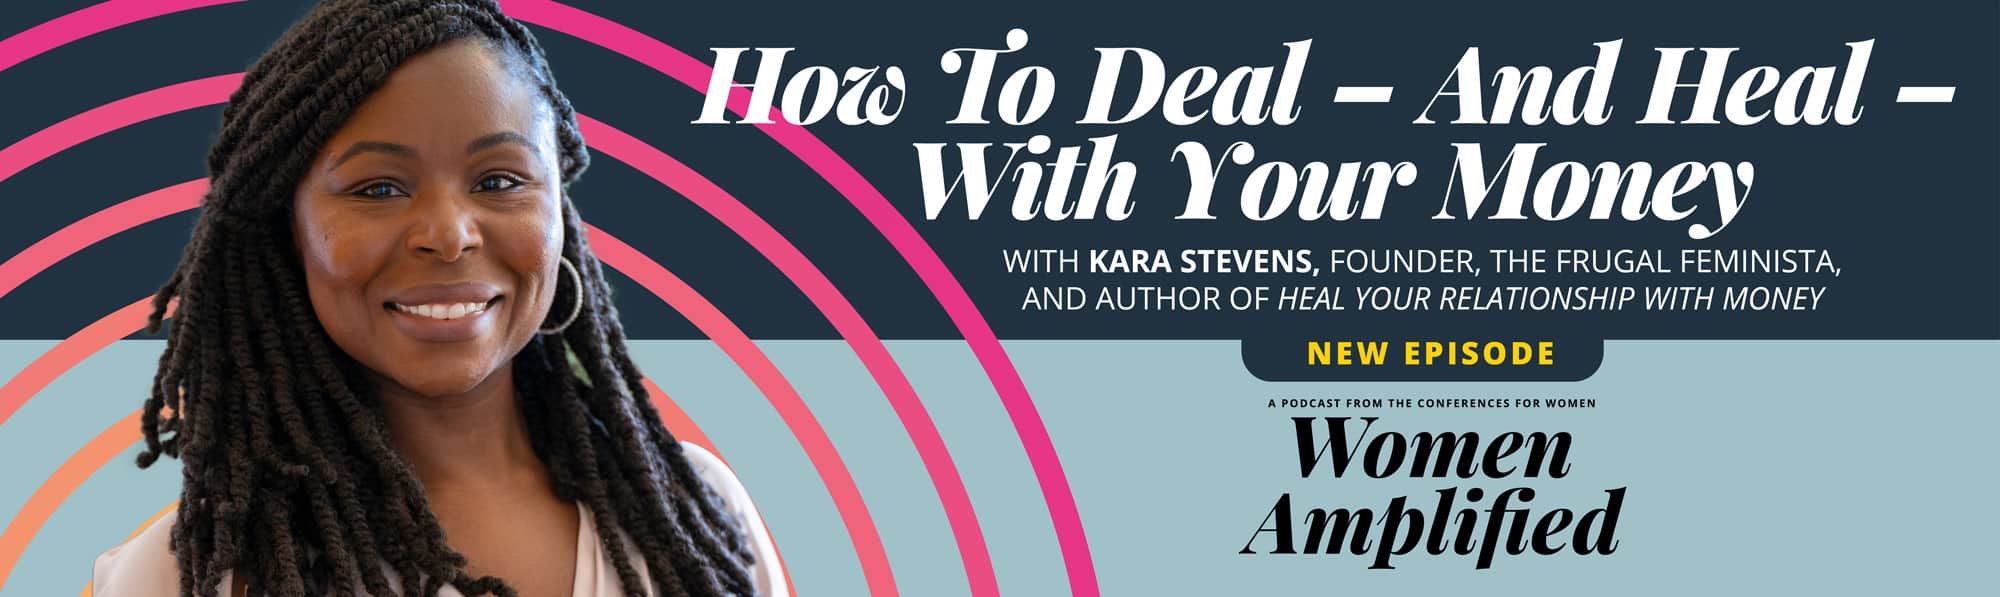 How To Deal – And Heal – With Your Money with Kara Stevens | Women Amplified Podcast